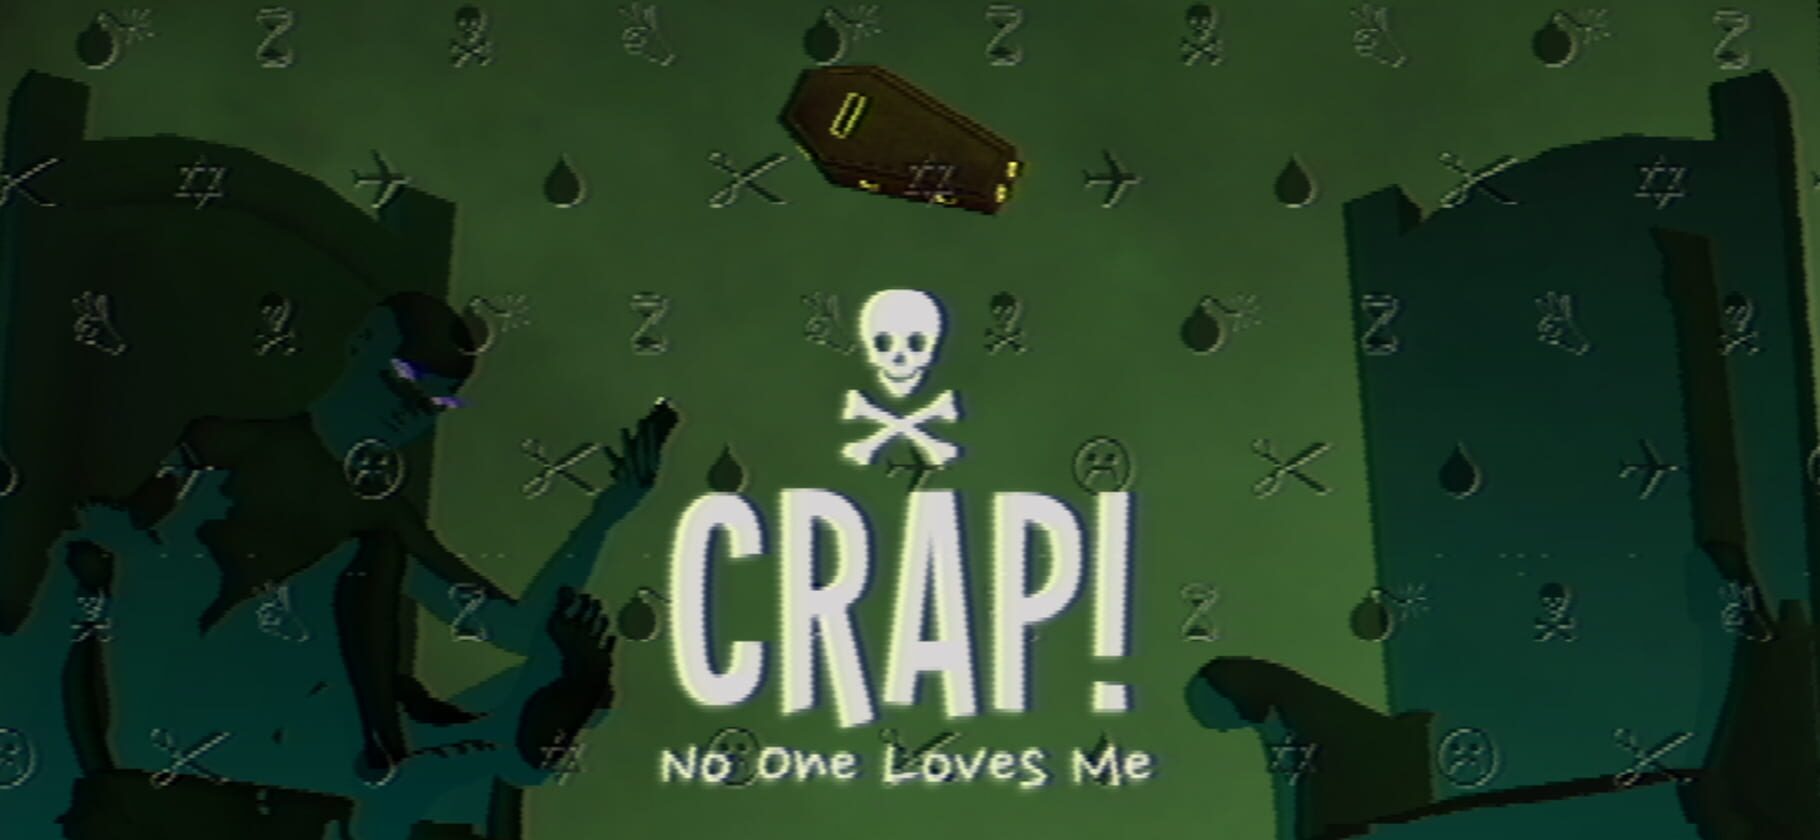 Crap! No One Loves Me featured image